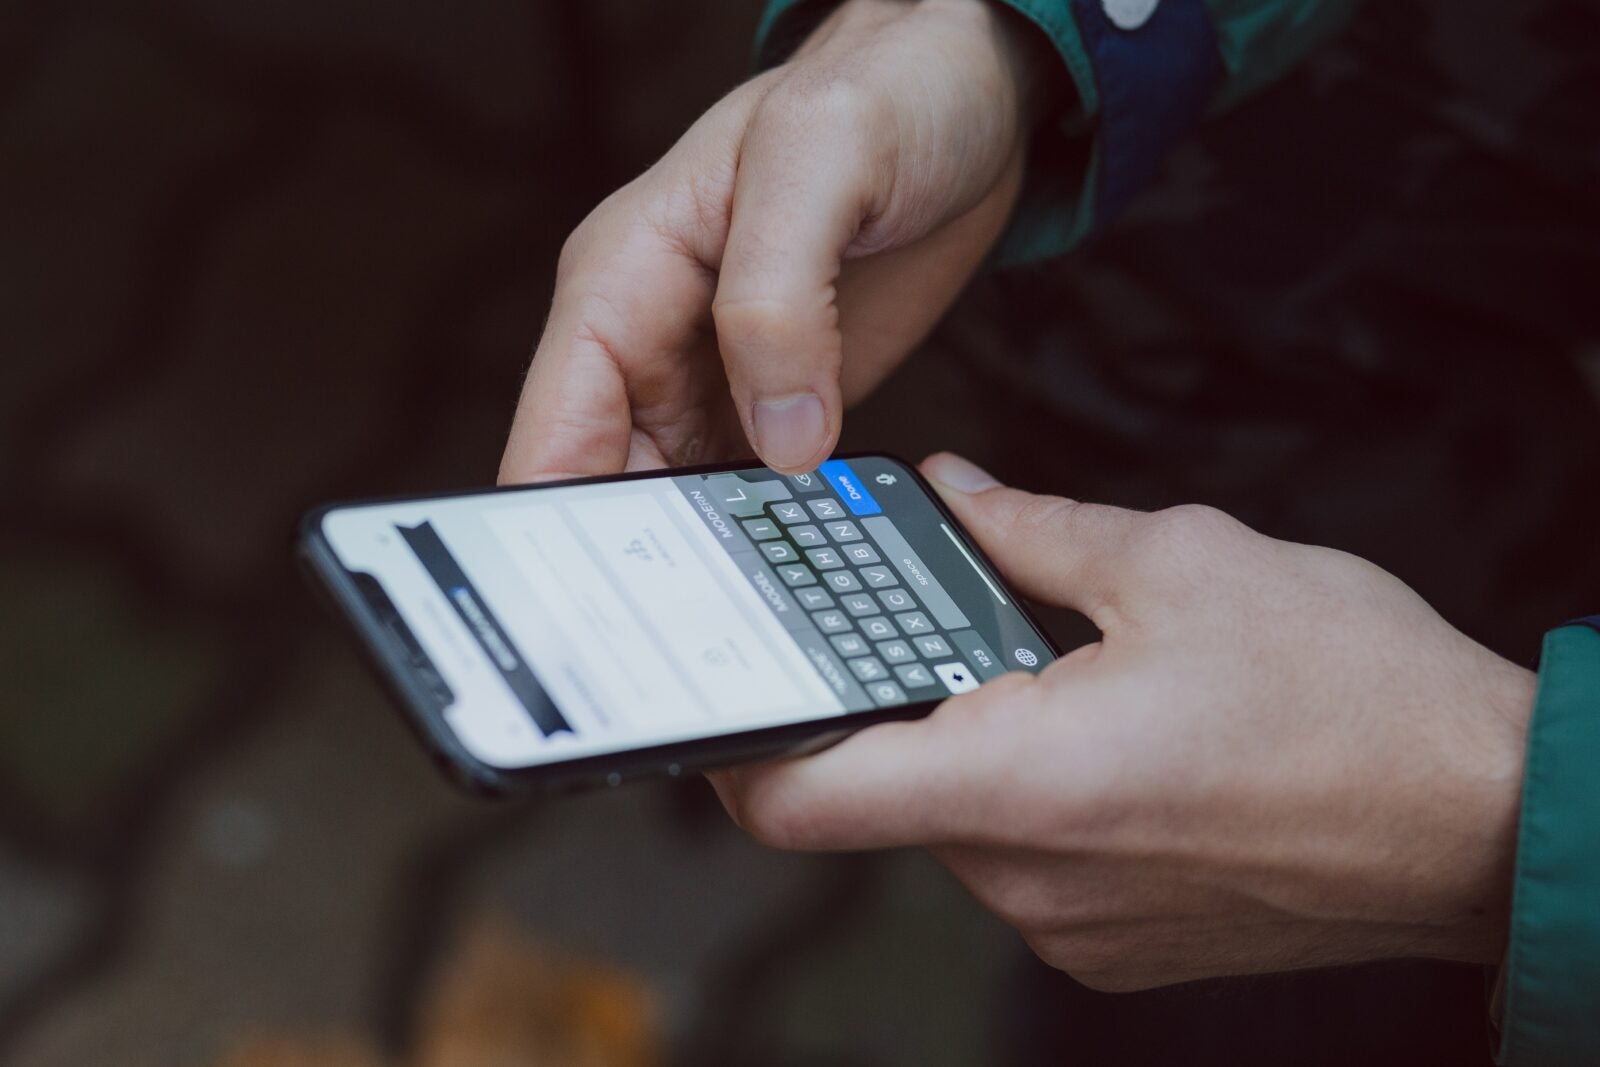 Close up image of a man's hands as he types on his phone. The phone has a messenger app opened.